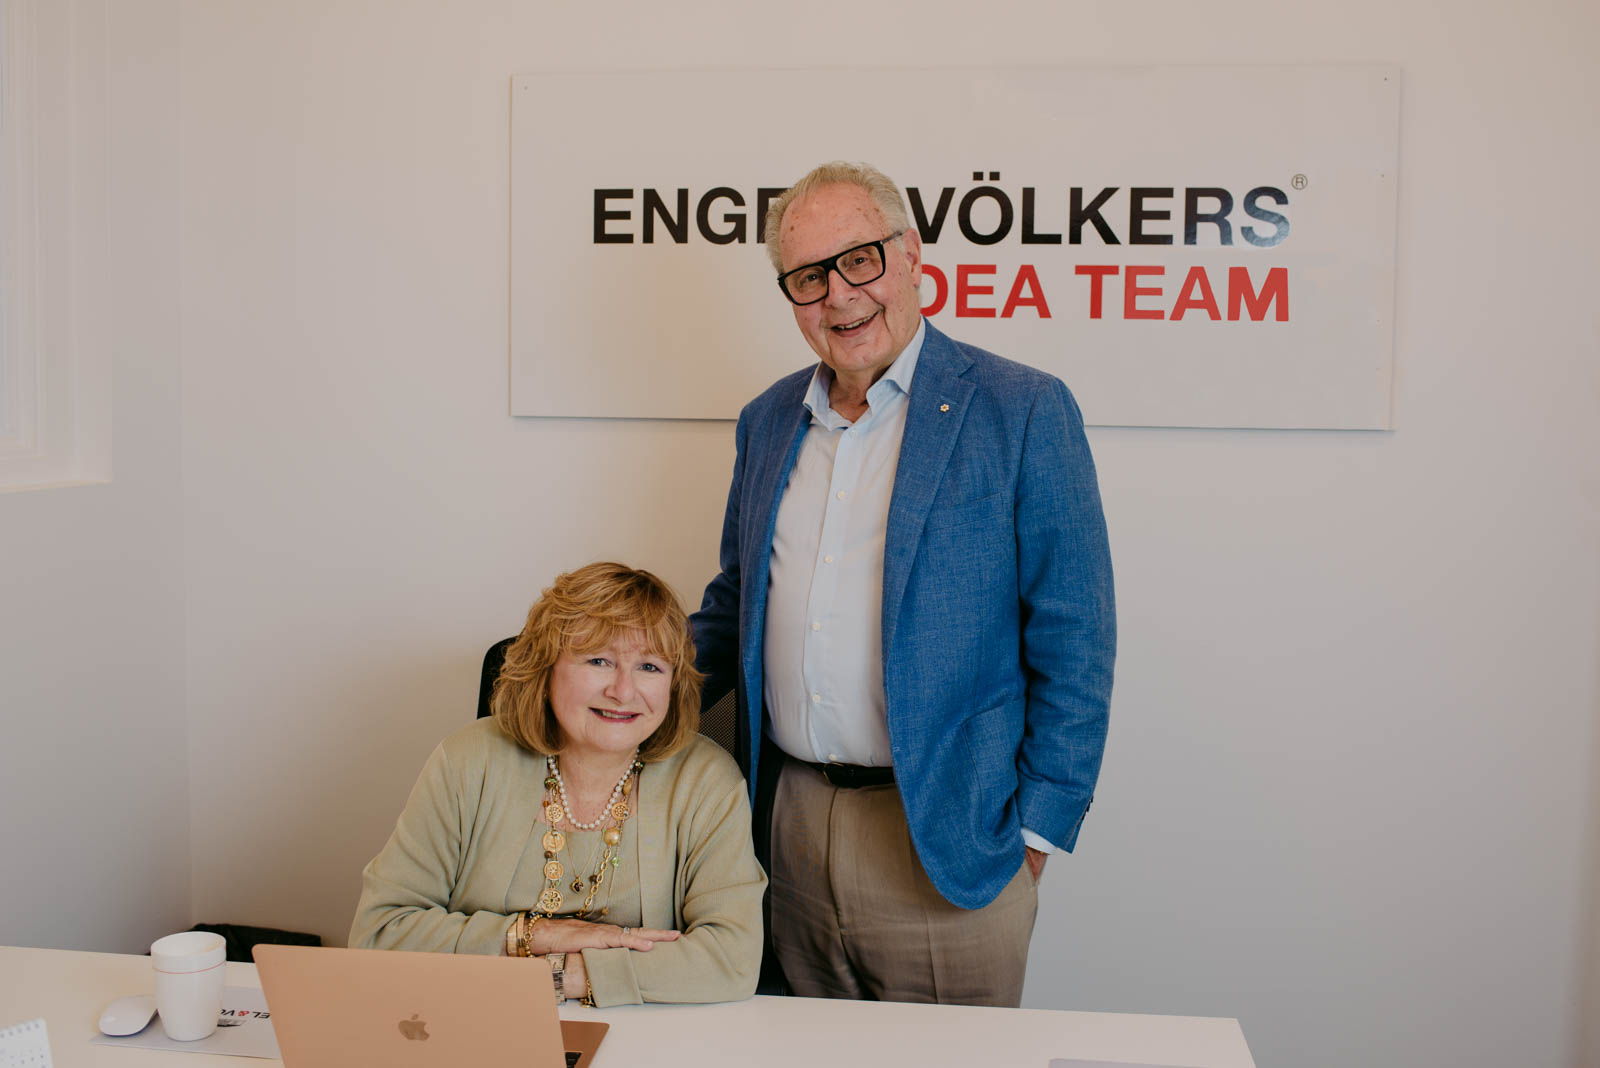 real estate agents Frank and Nancy O'Dea at their desk in Engel and Volkers office